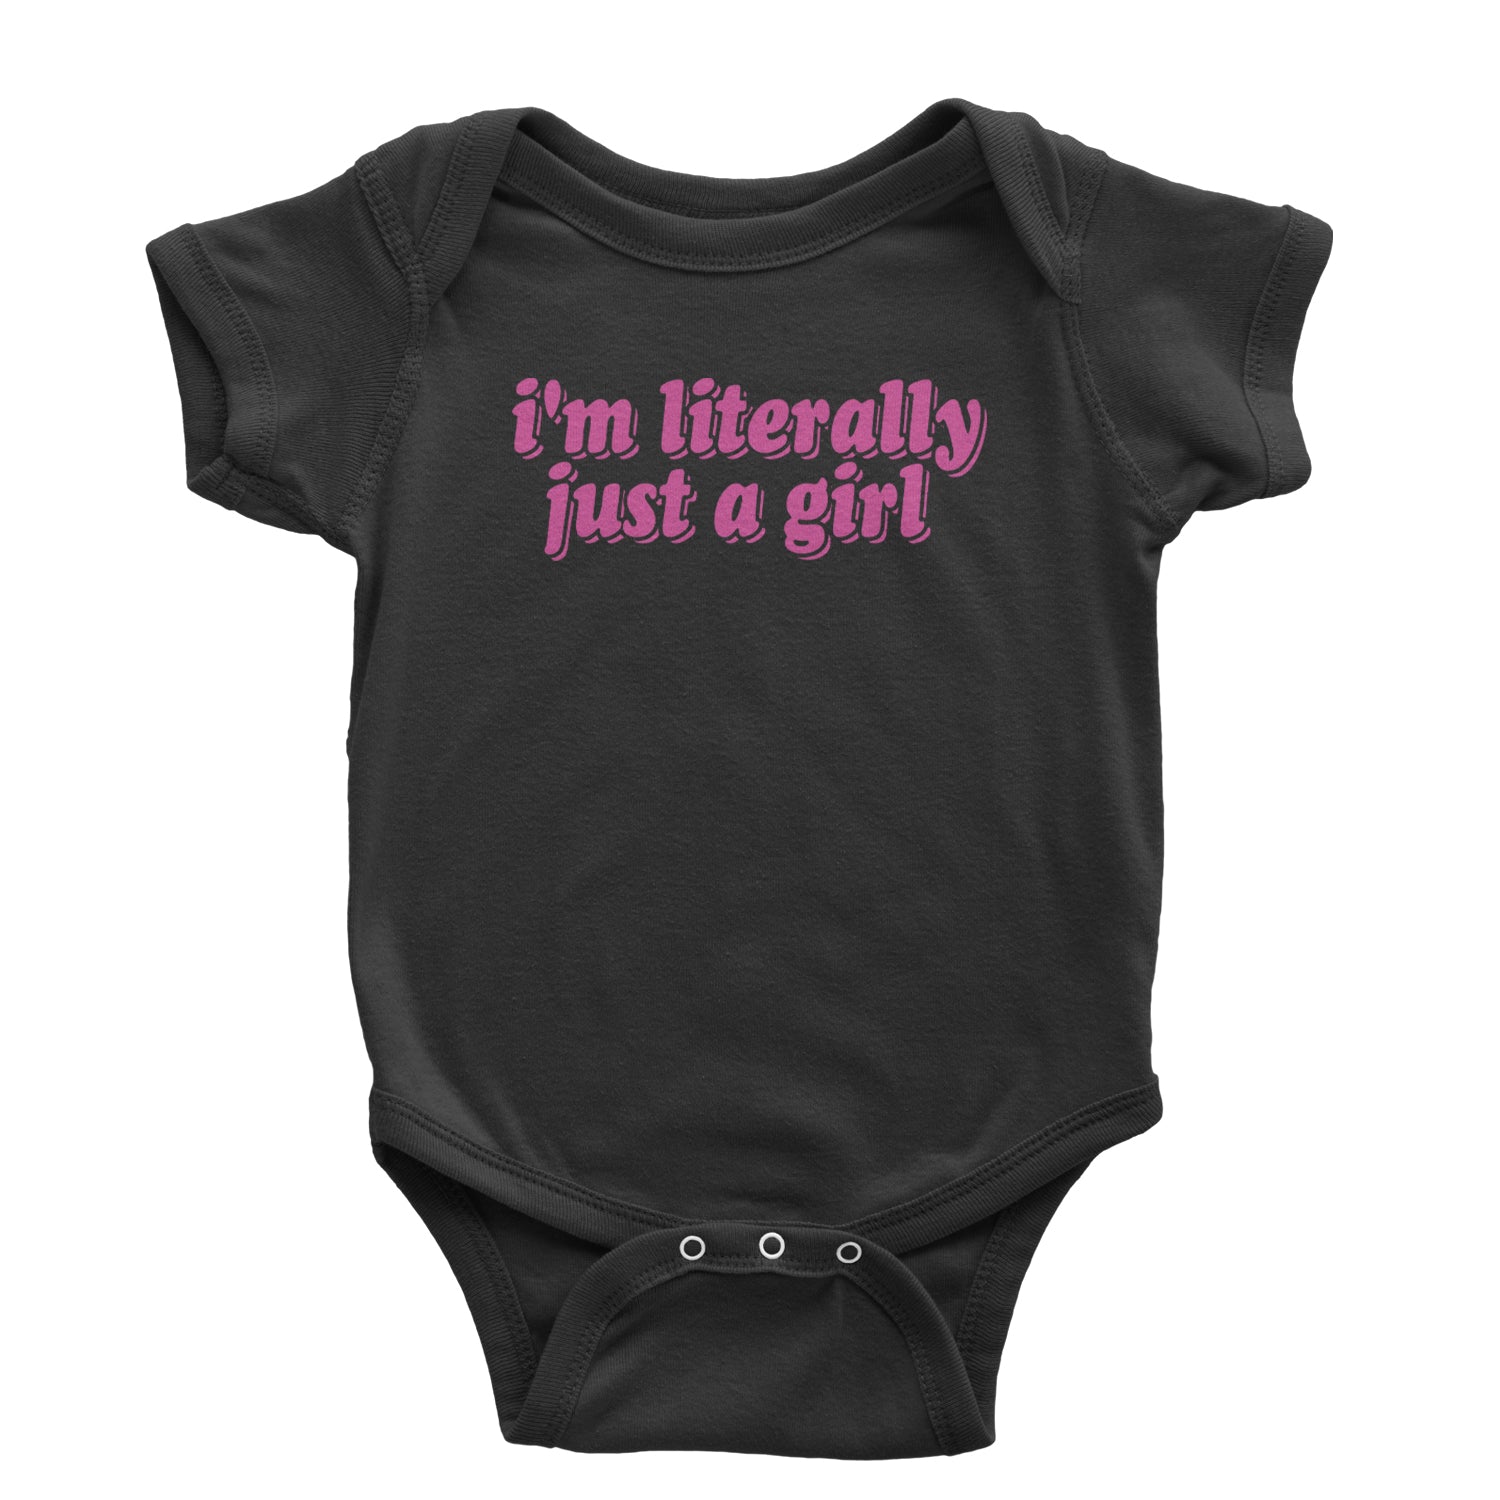 I'm Literally Just A Girl Infant One-Piece Romper Bodysuit and Toddler T-shirt